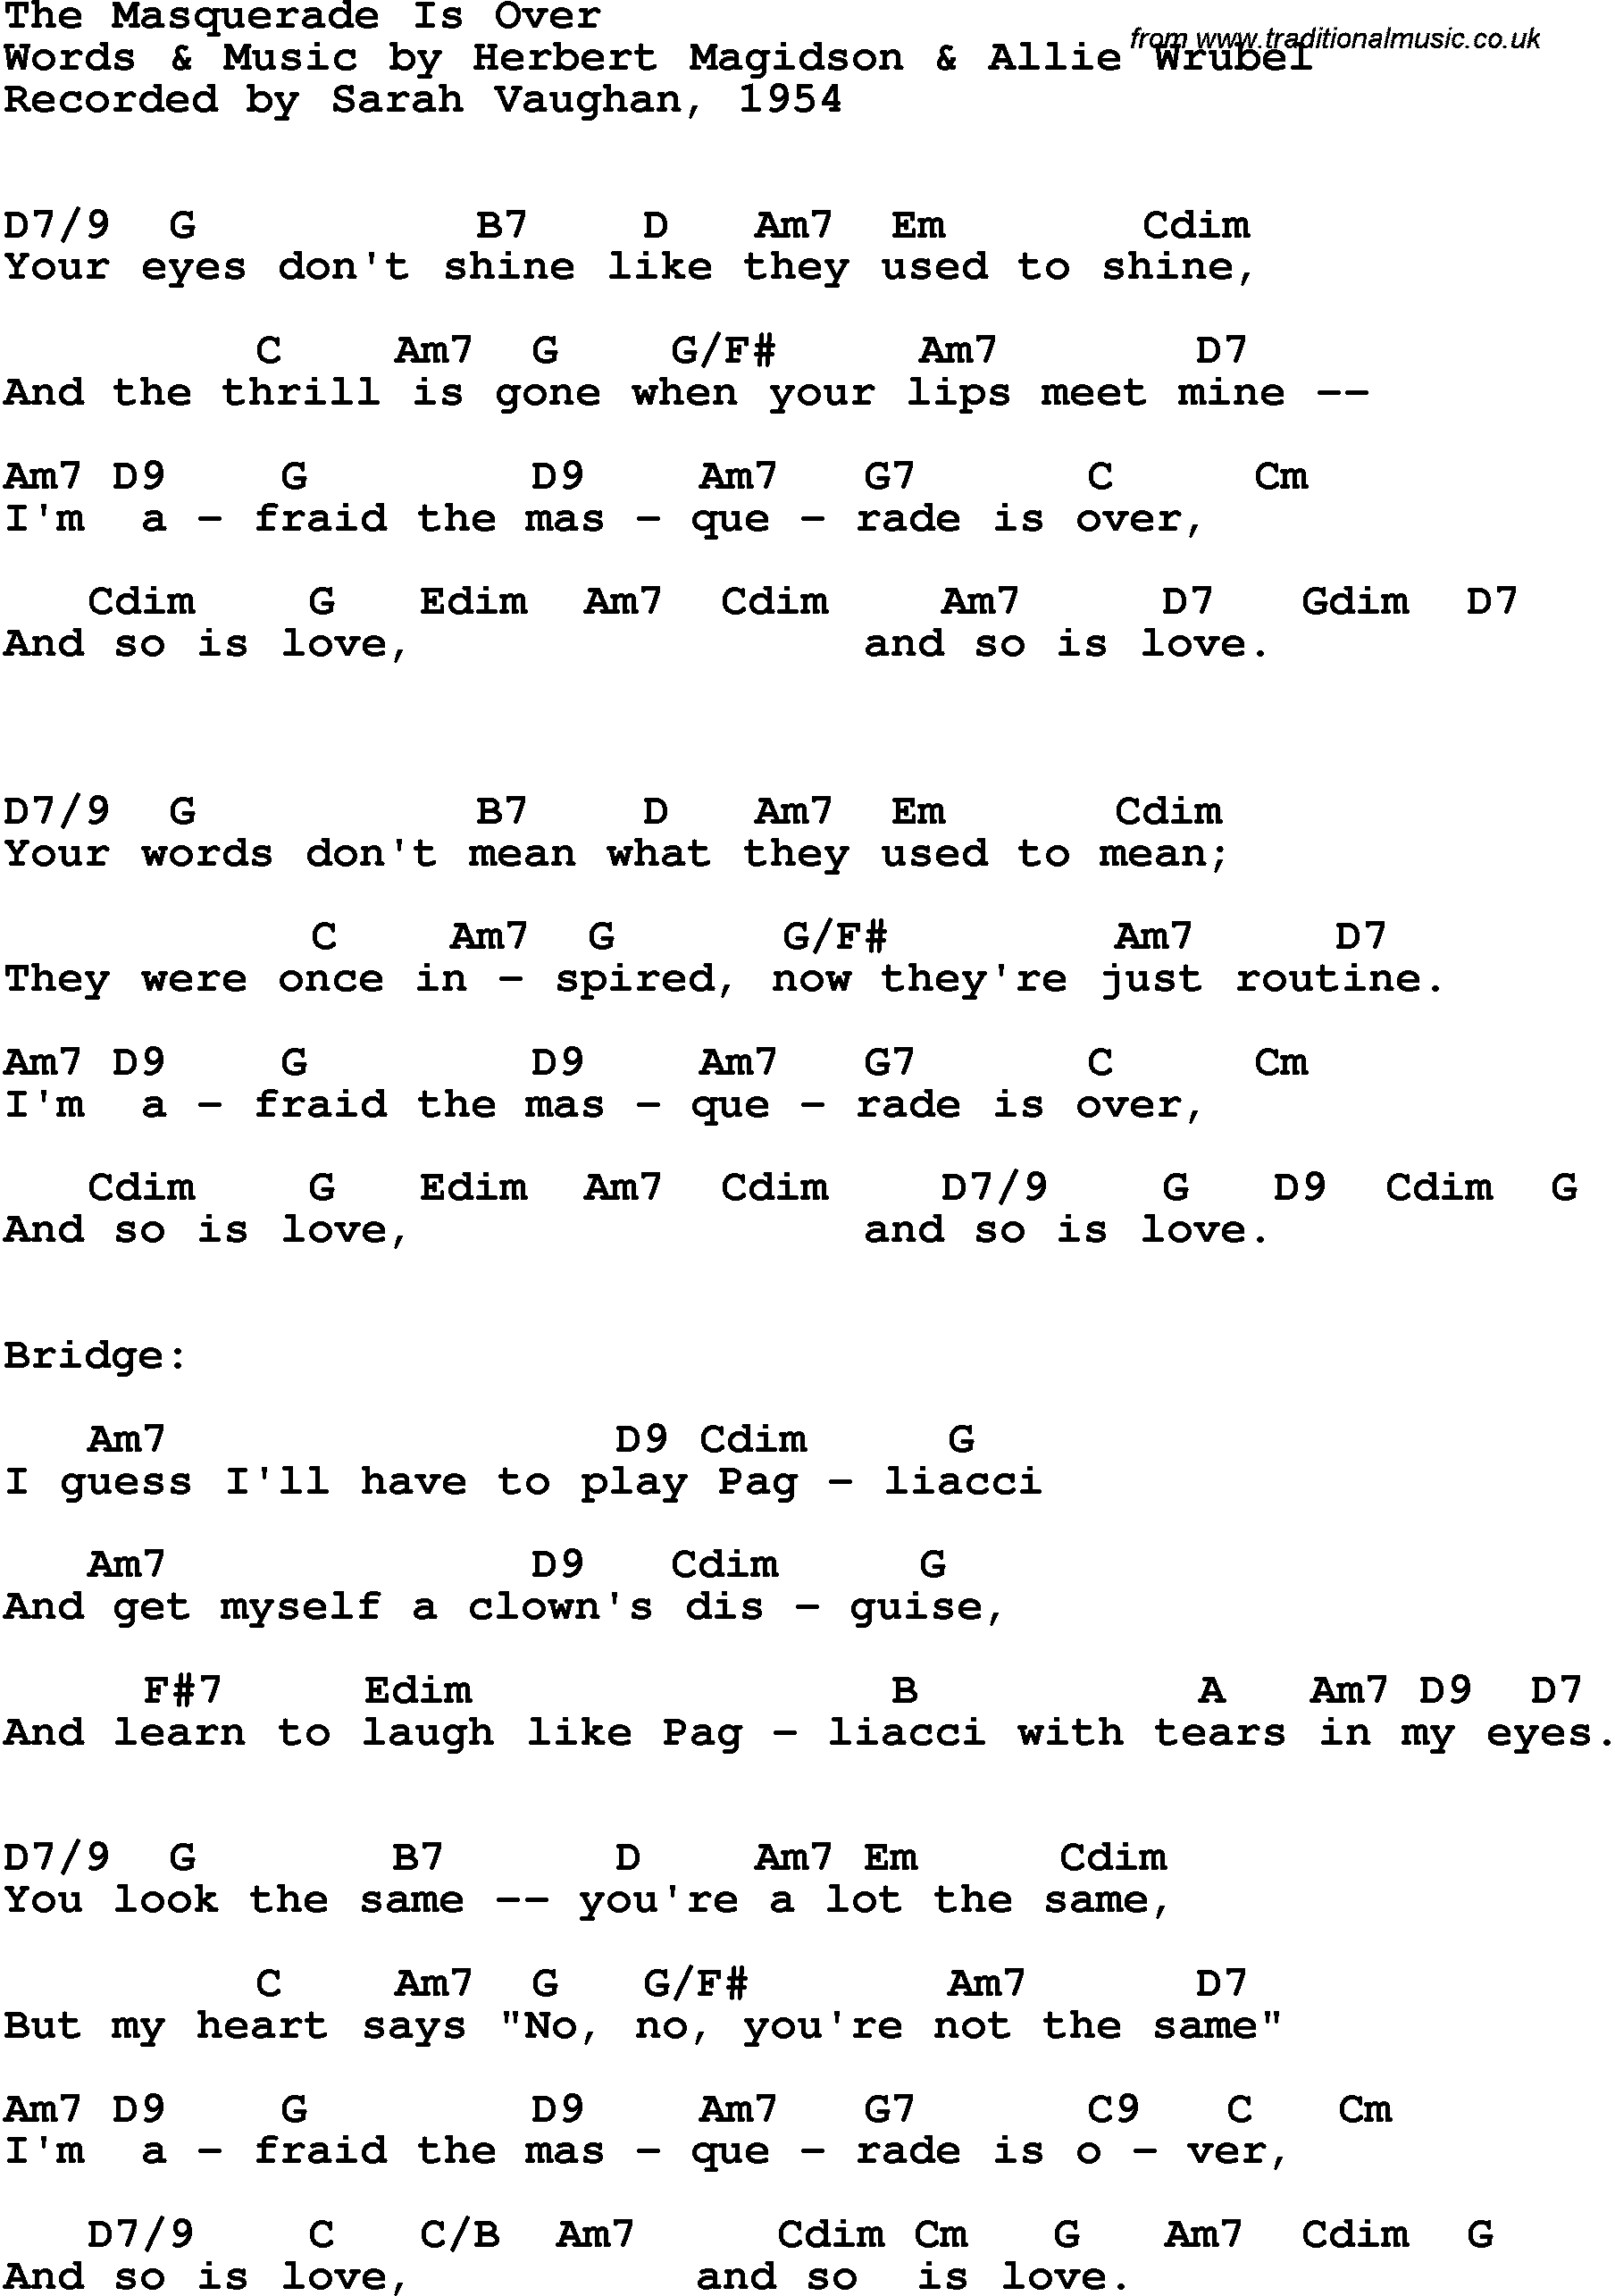 Song Lyrics with guitar chords for The Masquerade Is Over - Sarah Vaughan, 1954